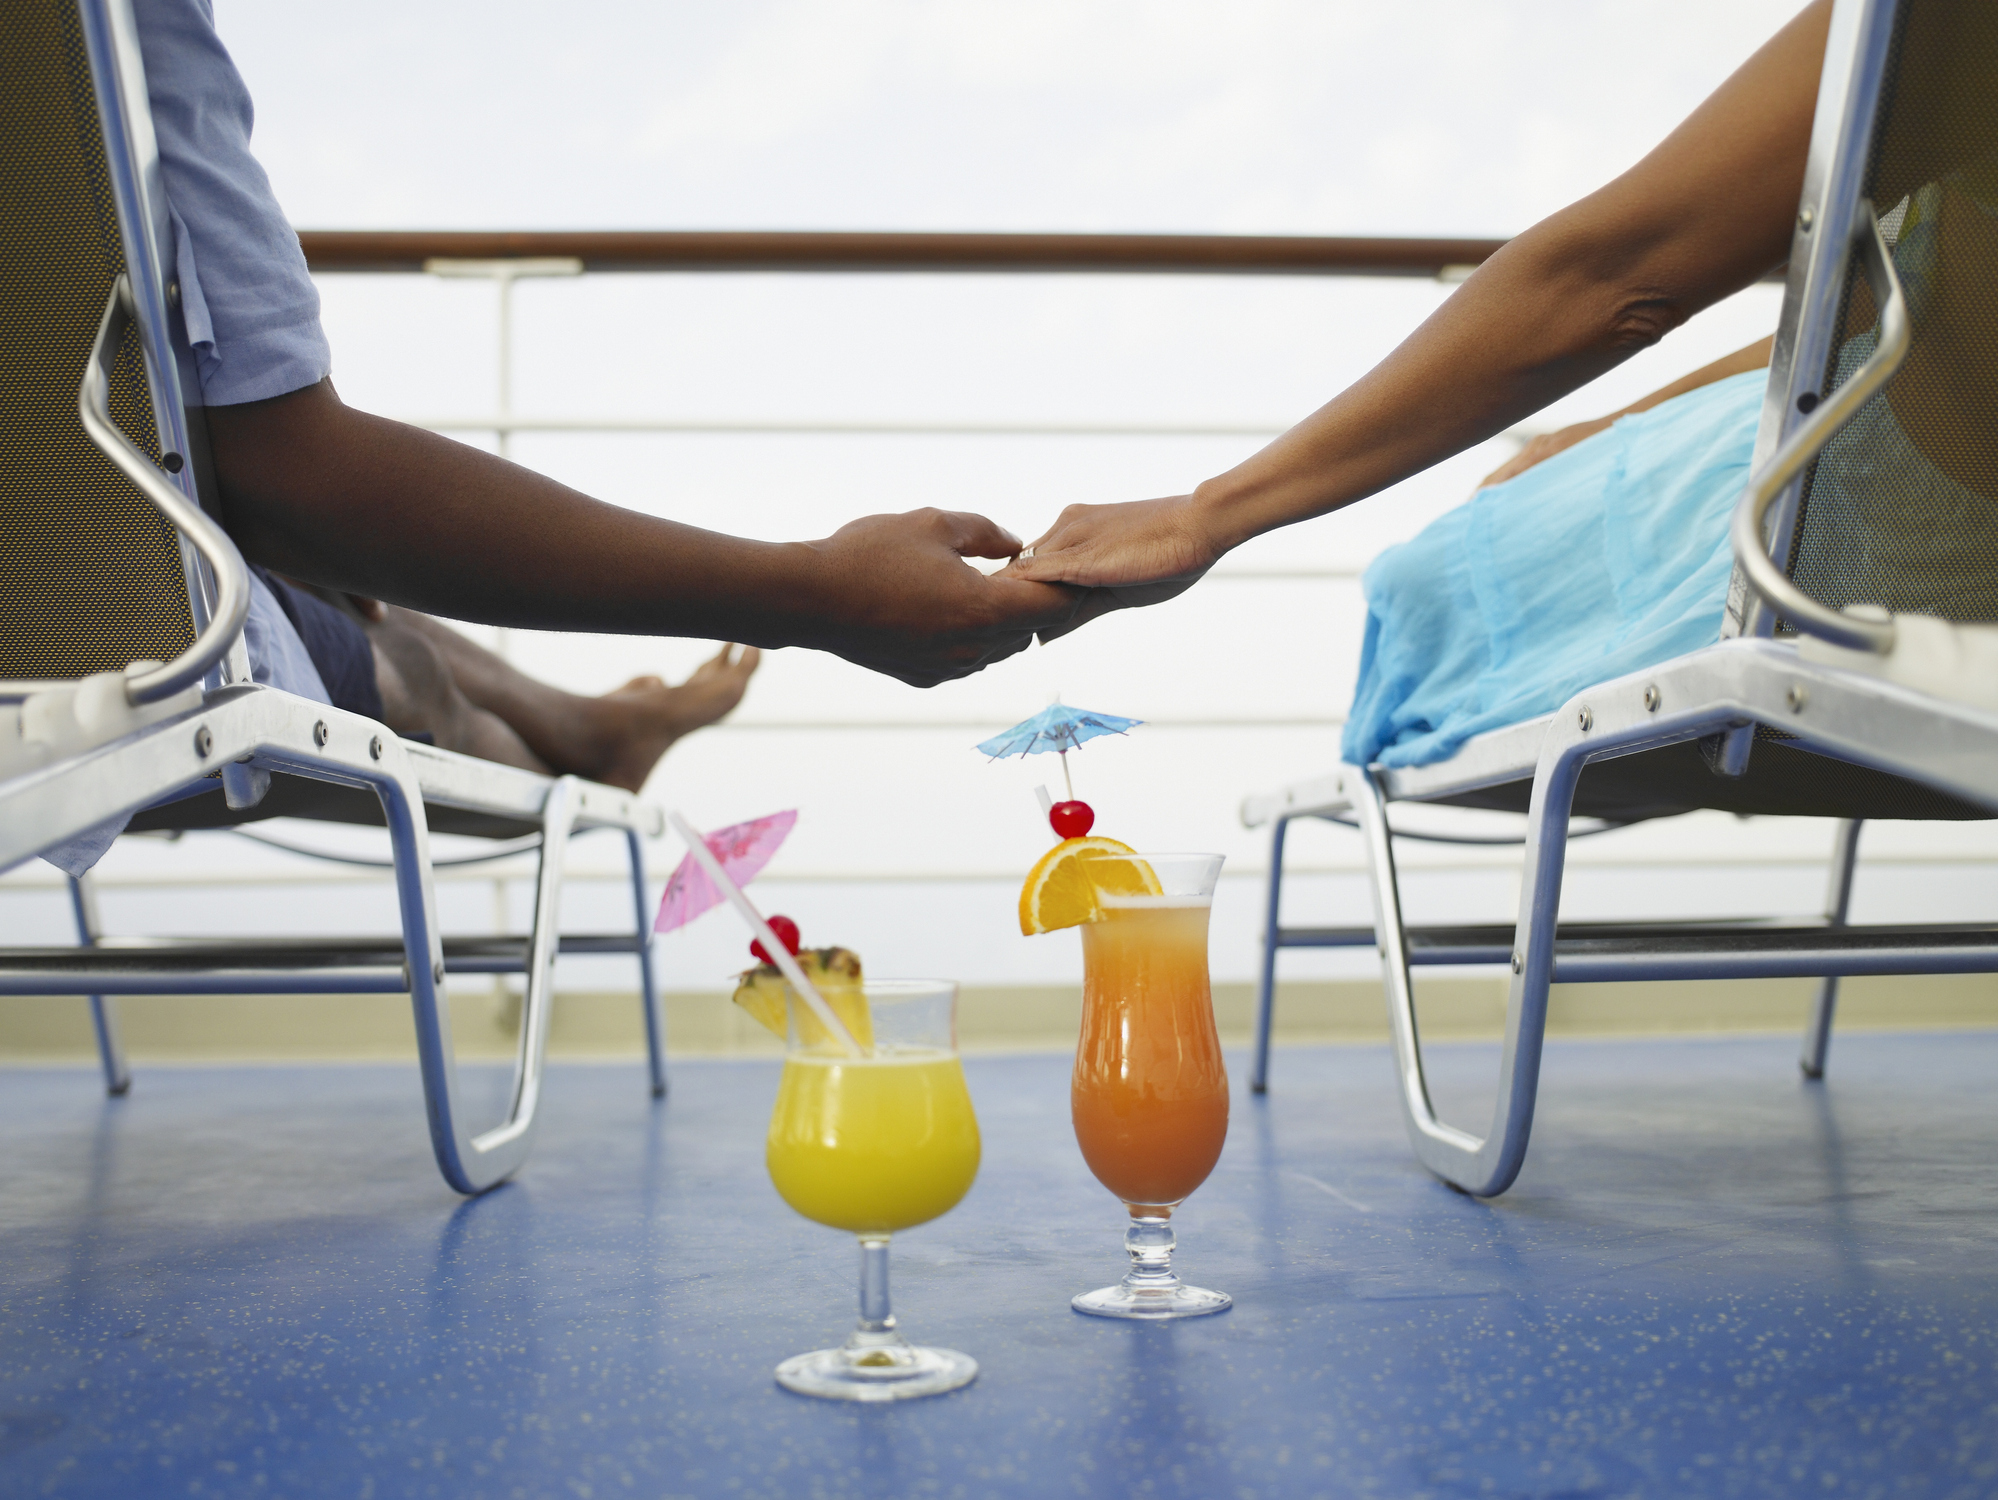 Two passengers holding hands on a cruise ship deck with tropical drinks between them.